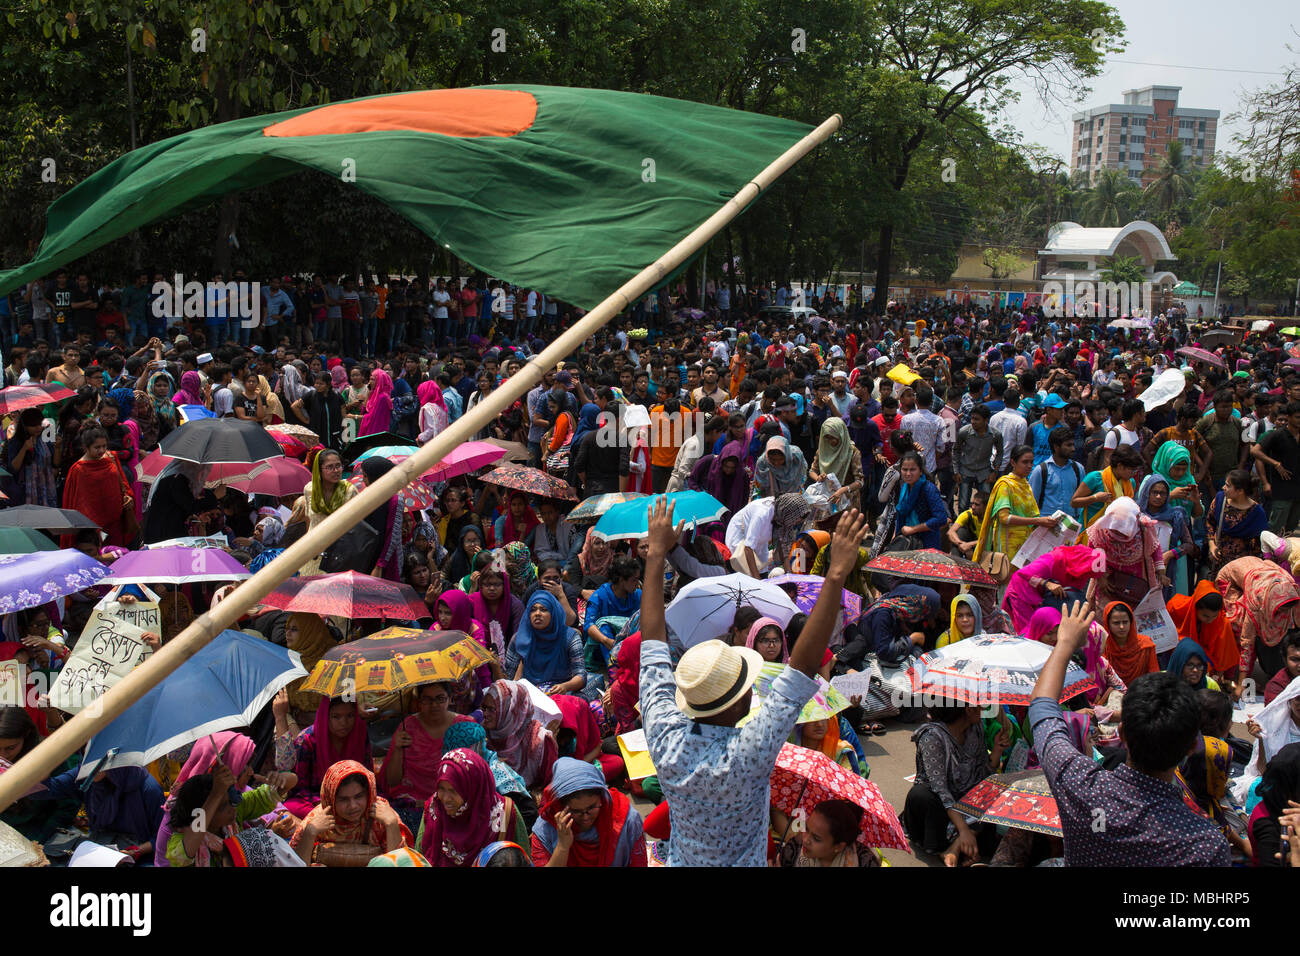 DHAKA, BANGLADESH - APRIL 11 : Bangladeshi students gather for a protest against quotas for certain groups of people in government jobs in Dhaka, Bangladesh on April 11, 2018.  Tens of thousands of university students marched in cities across Bangladesh on April 11 in one of the biggest protests faced by Prime Minister Sheikh Hasina in her decade in power. Students fighting against a controversial policy that sets aside government jobs for special groups have united in mass protests rarely seen on such a scale in Bangladesh. Credit: zakir hossain chowdhury zakir/Alamy Live News Stock Photo